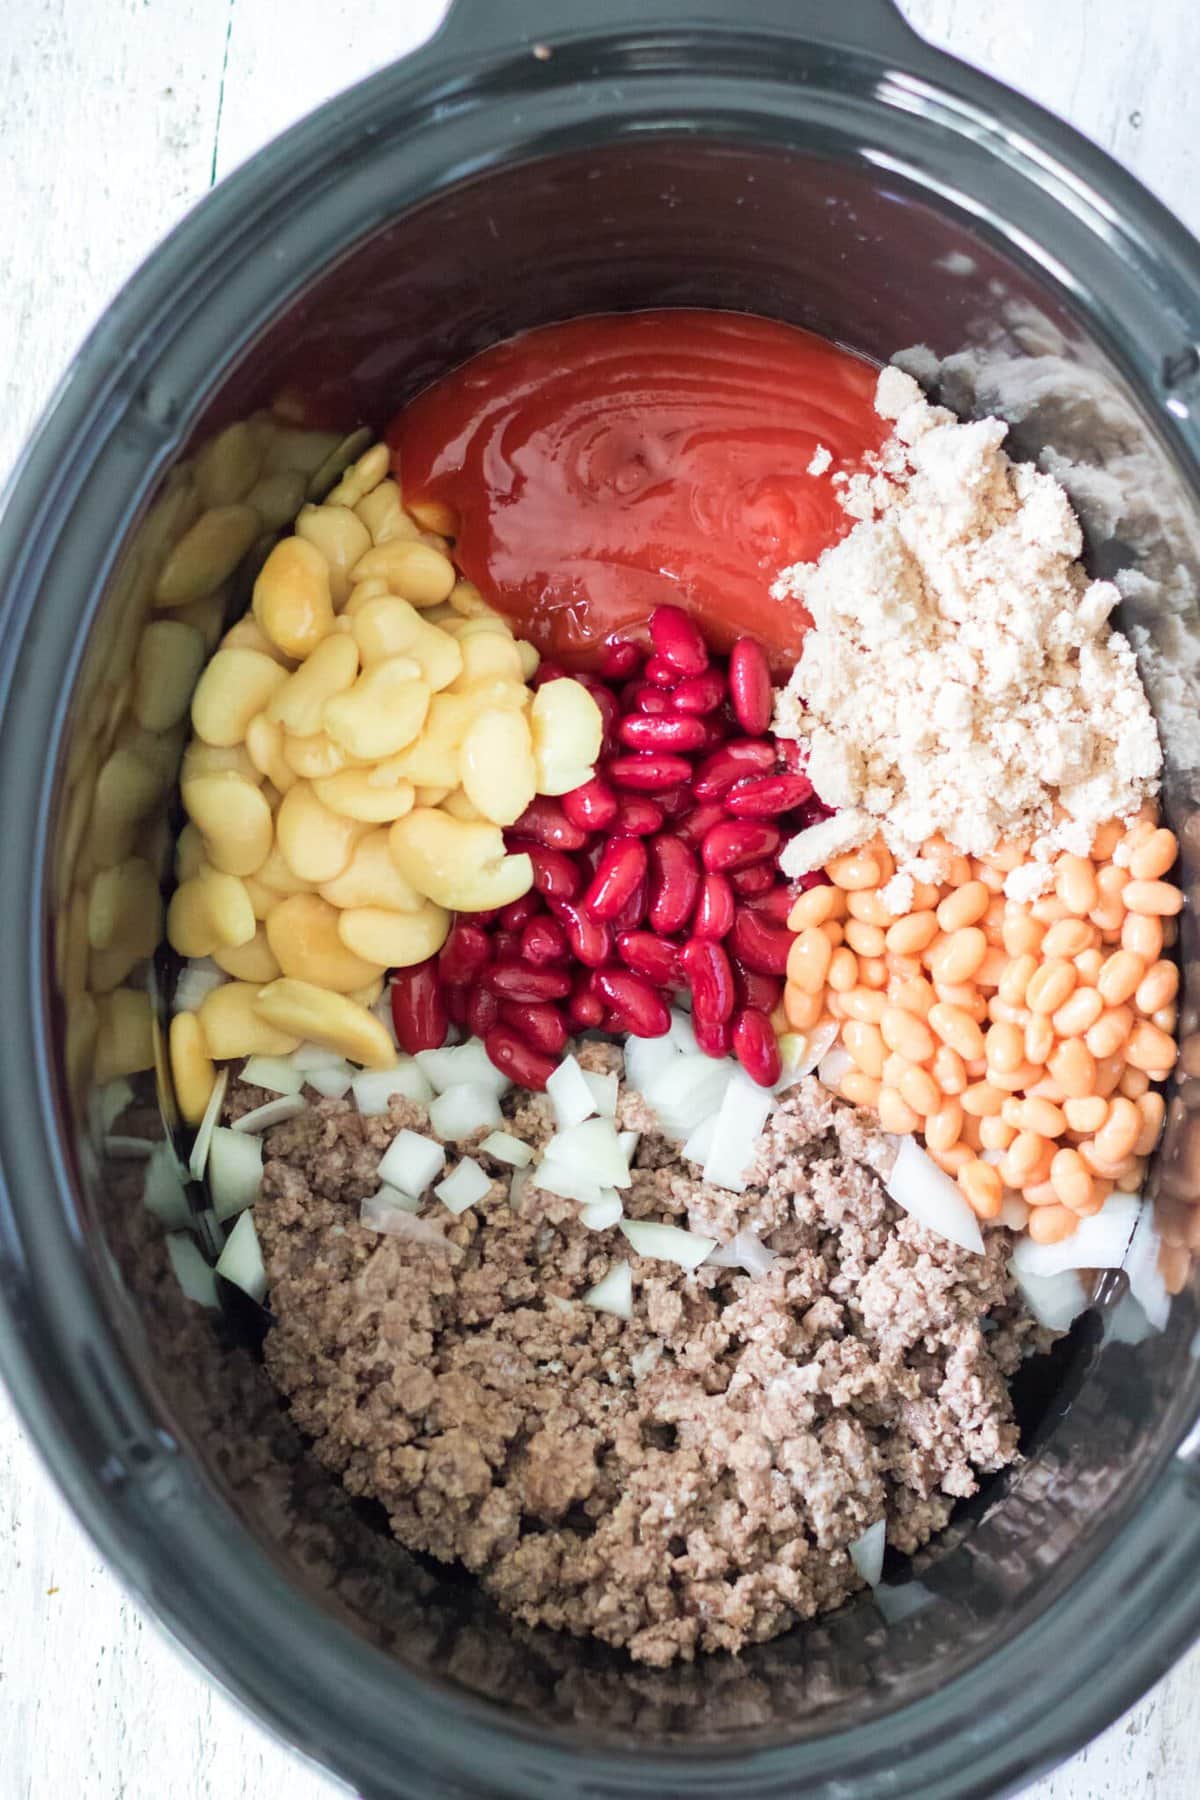 Mixing the ingredients in the crockpot.